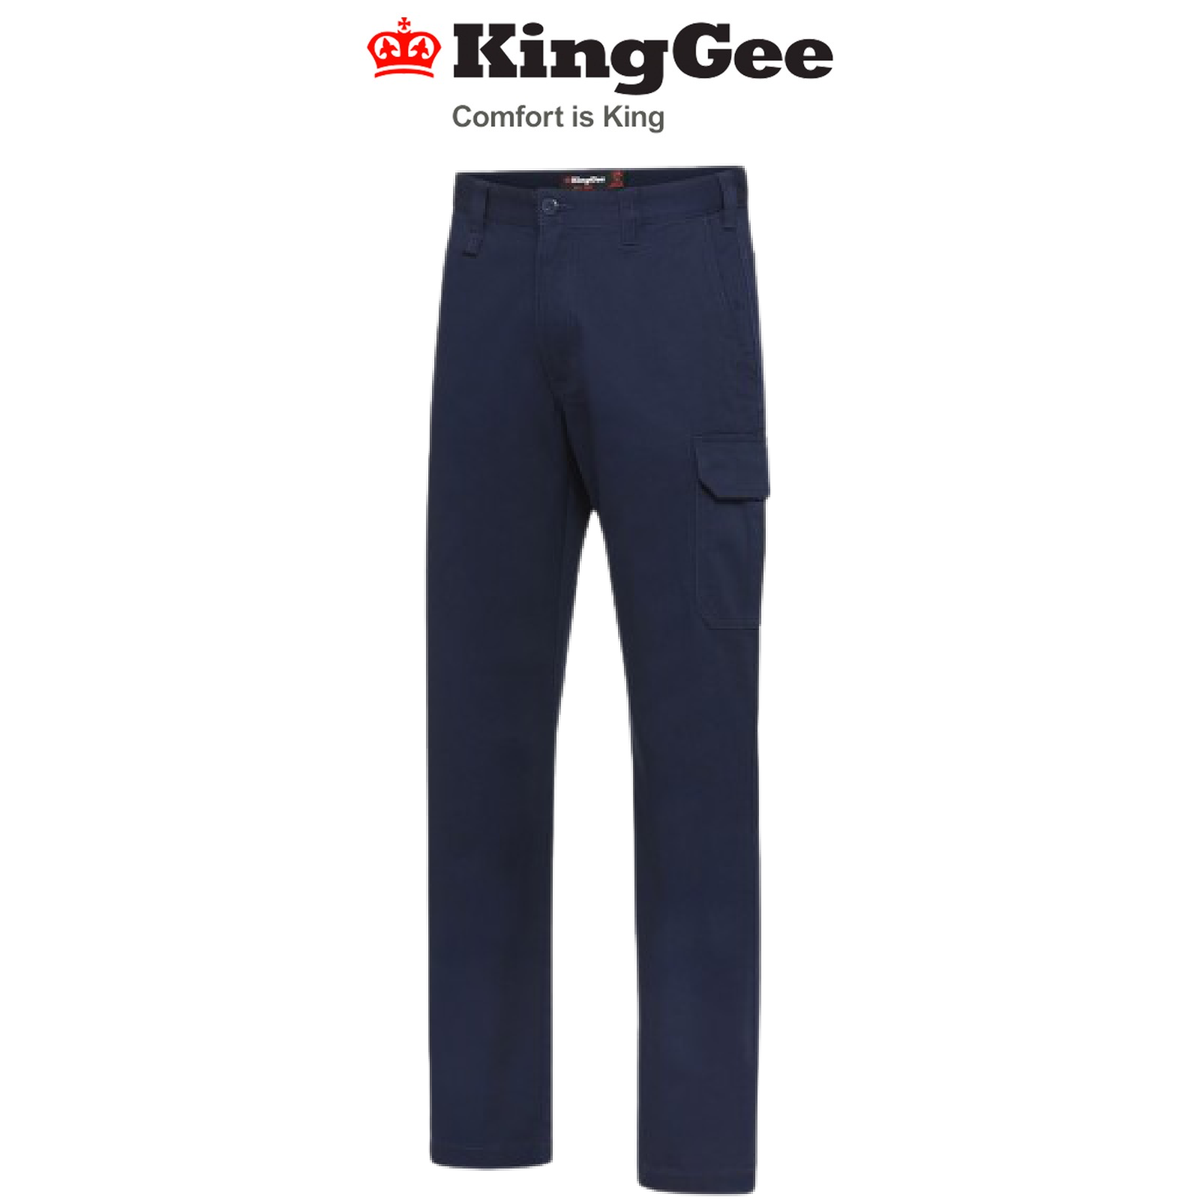 KingGee Mens Basic Stretch Cargo Pants Strong Work Safety Comfortable K03030